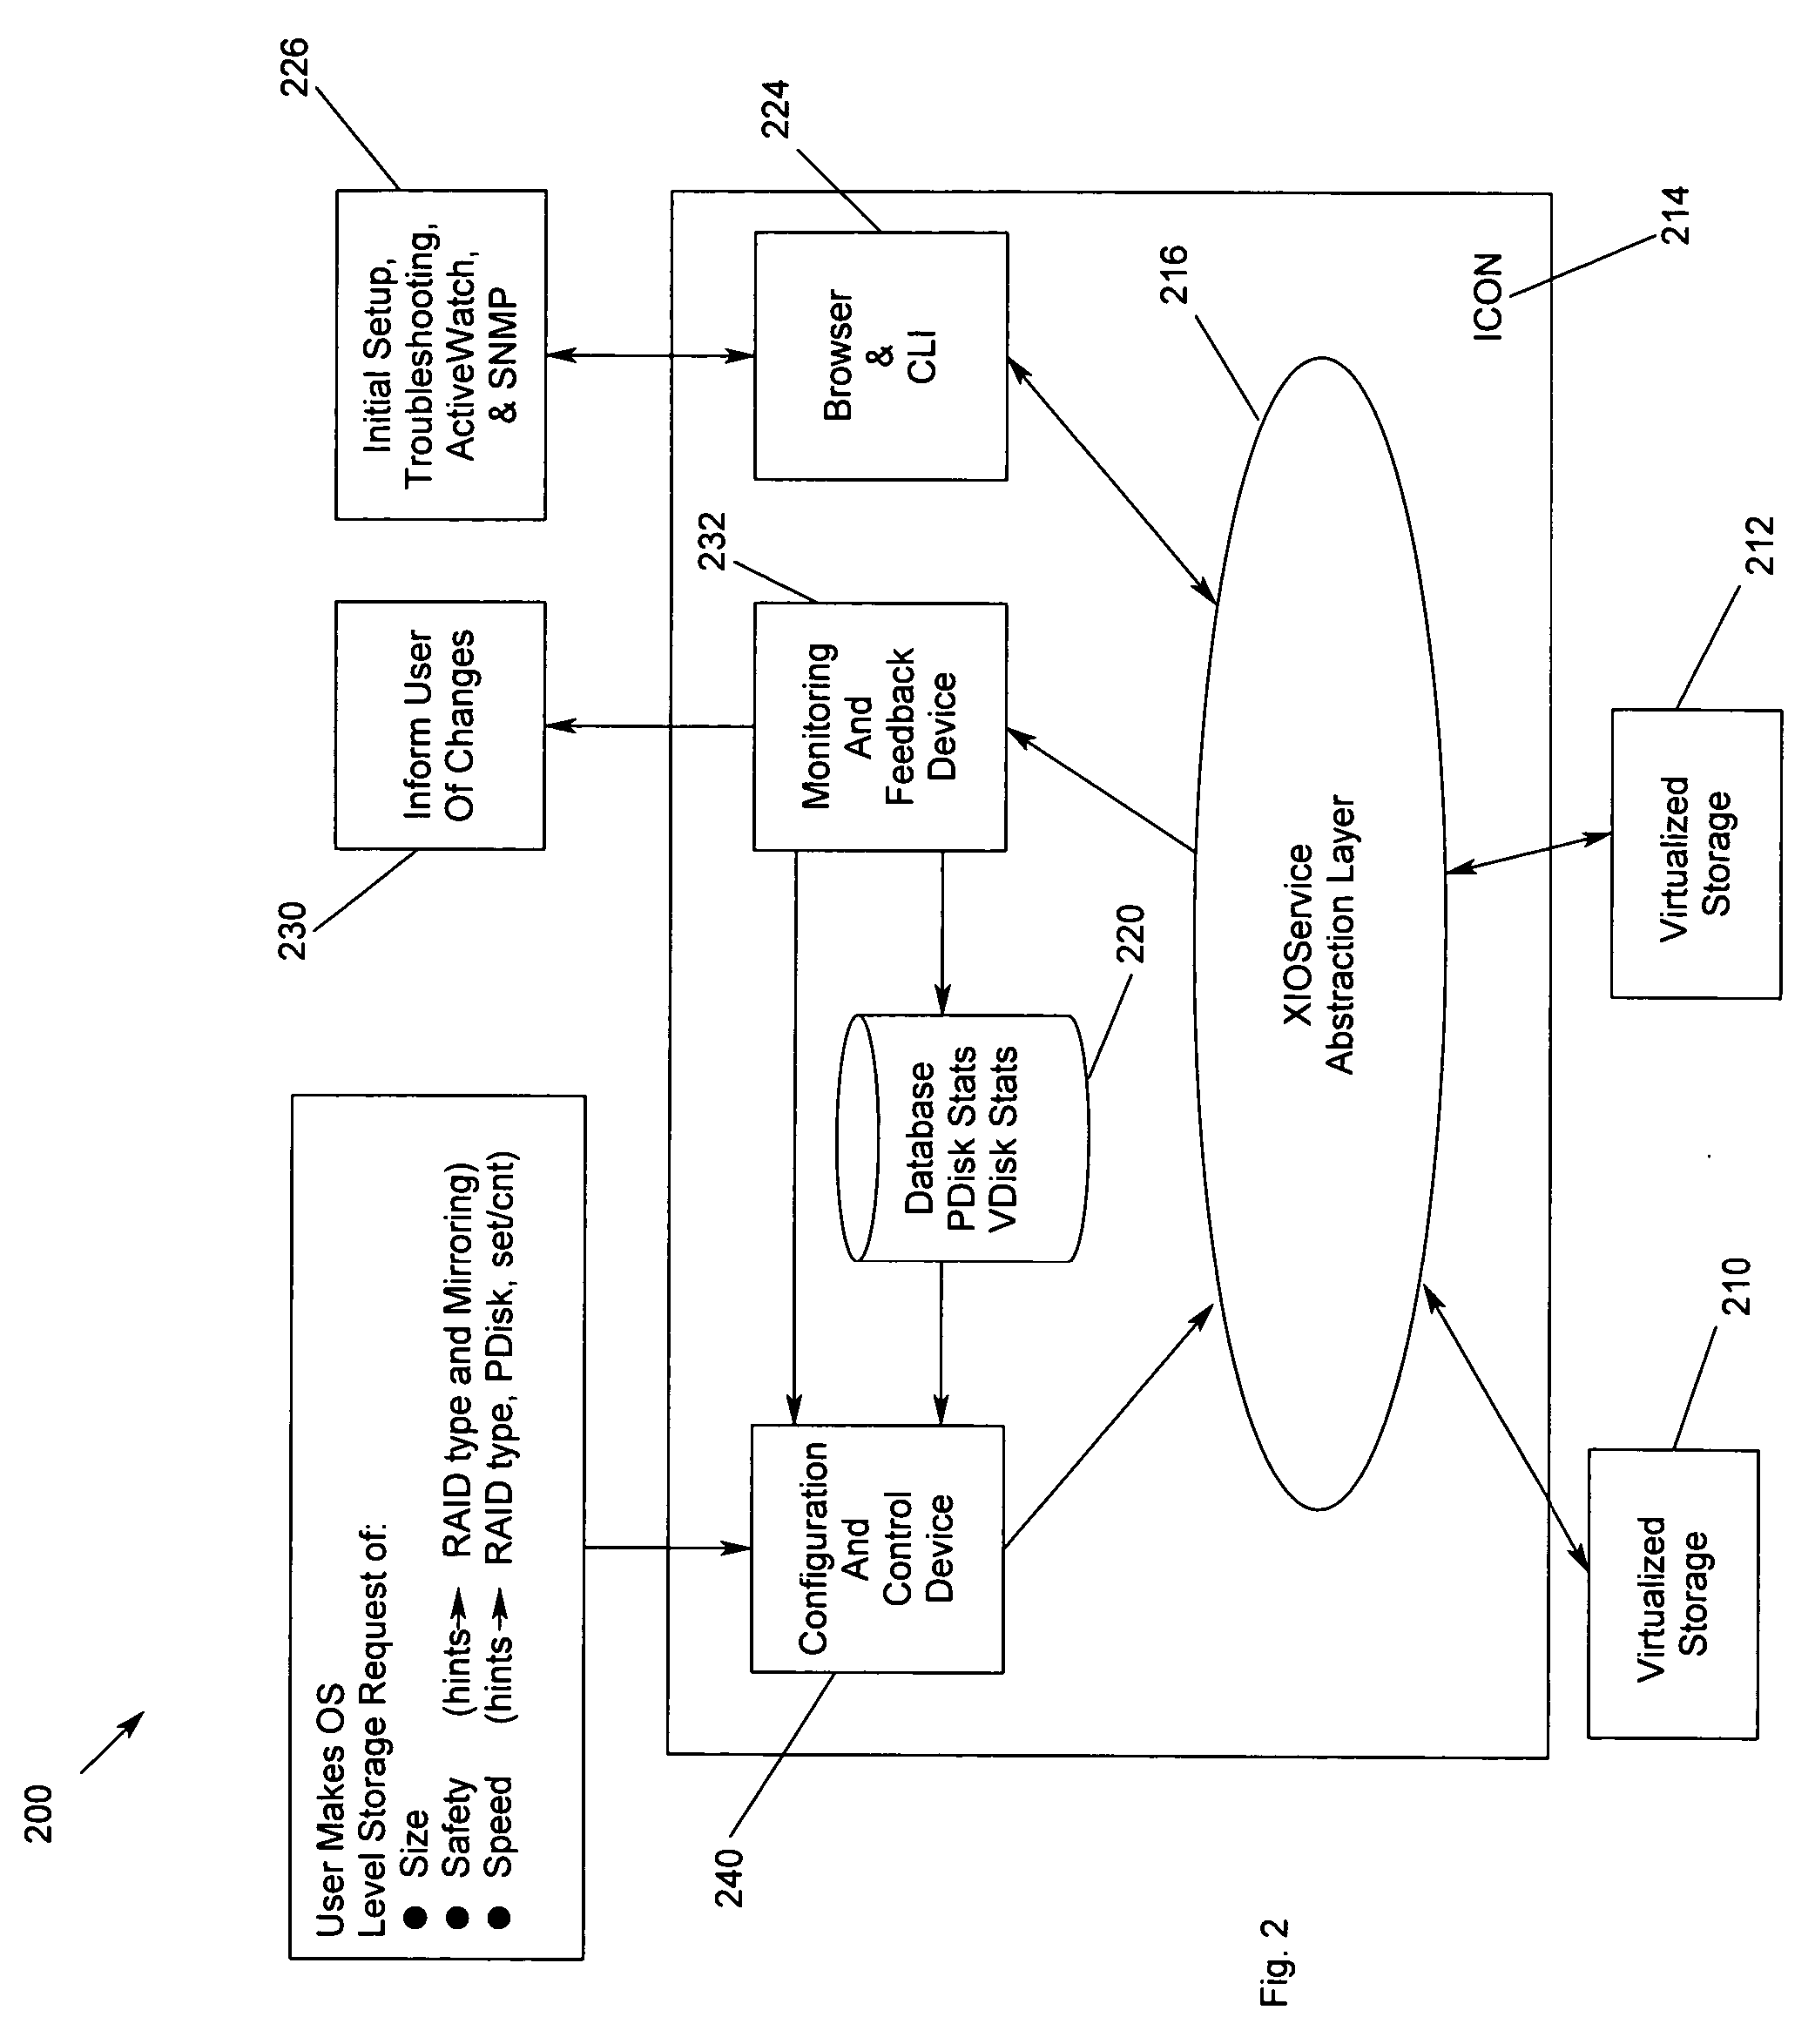 Method, apparatus and program storage device for providing adaptive, attribute driven, closed-loop storage management configuration and control